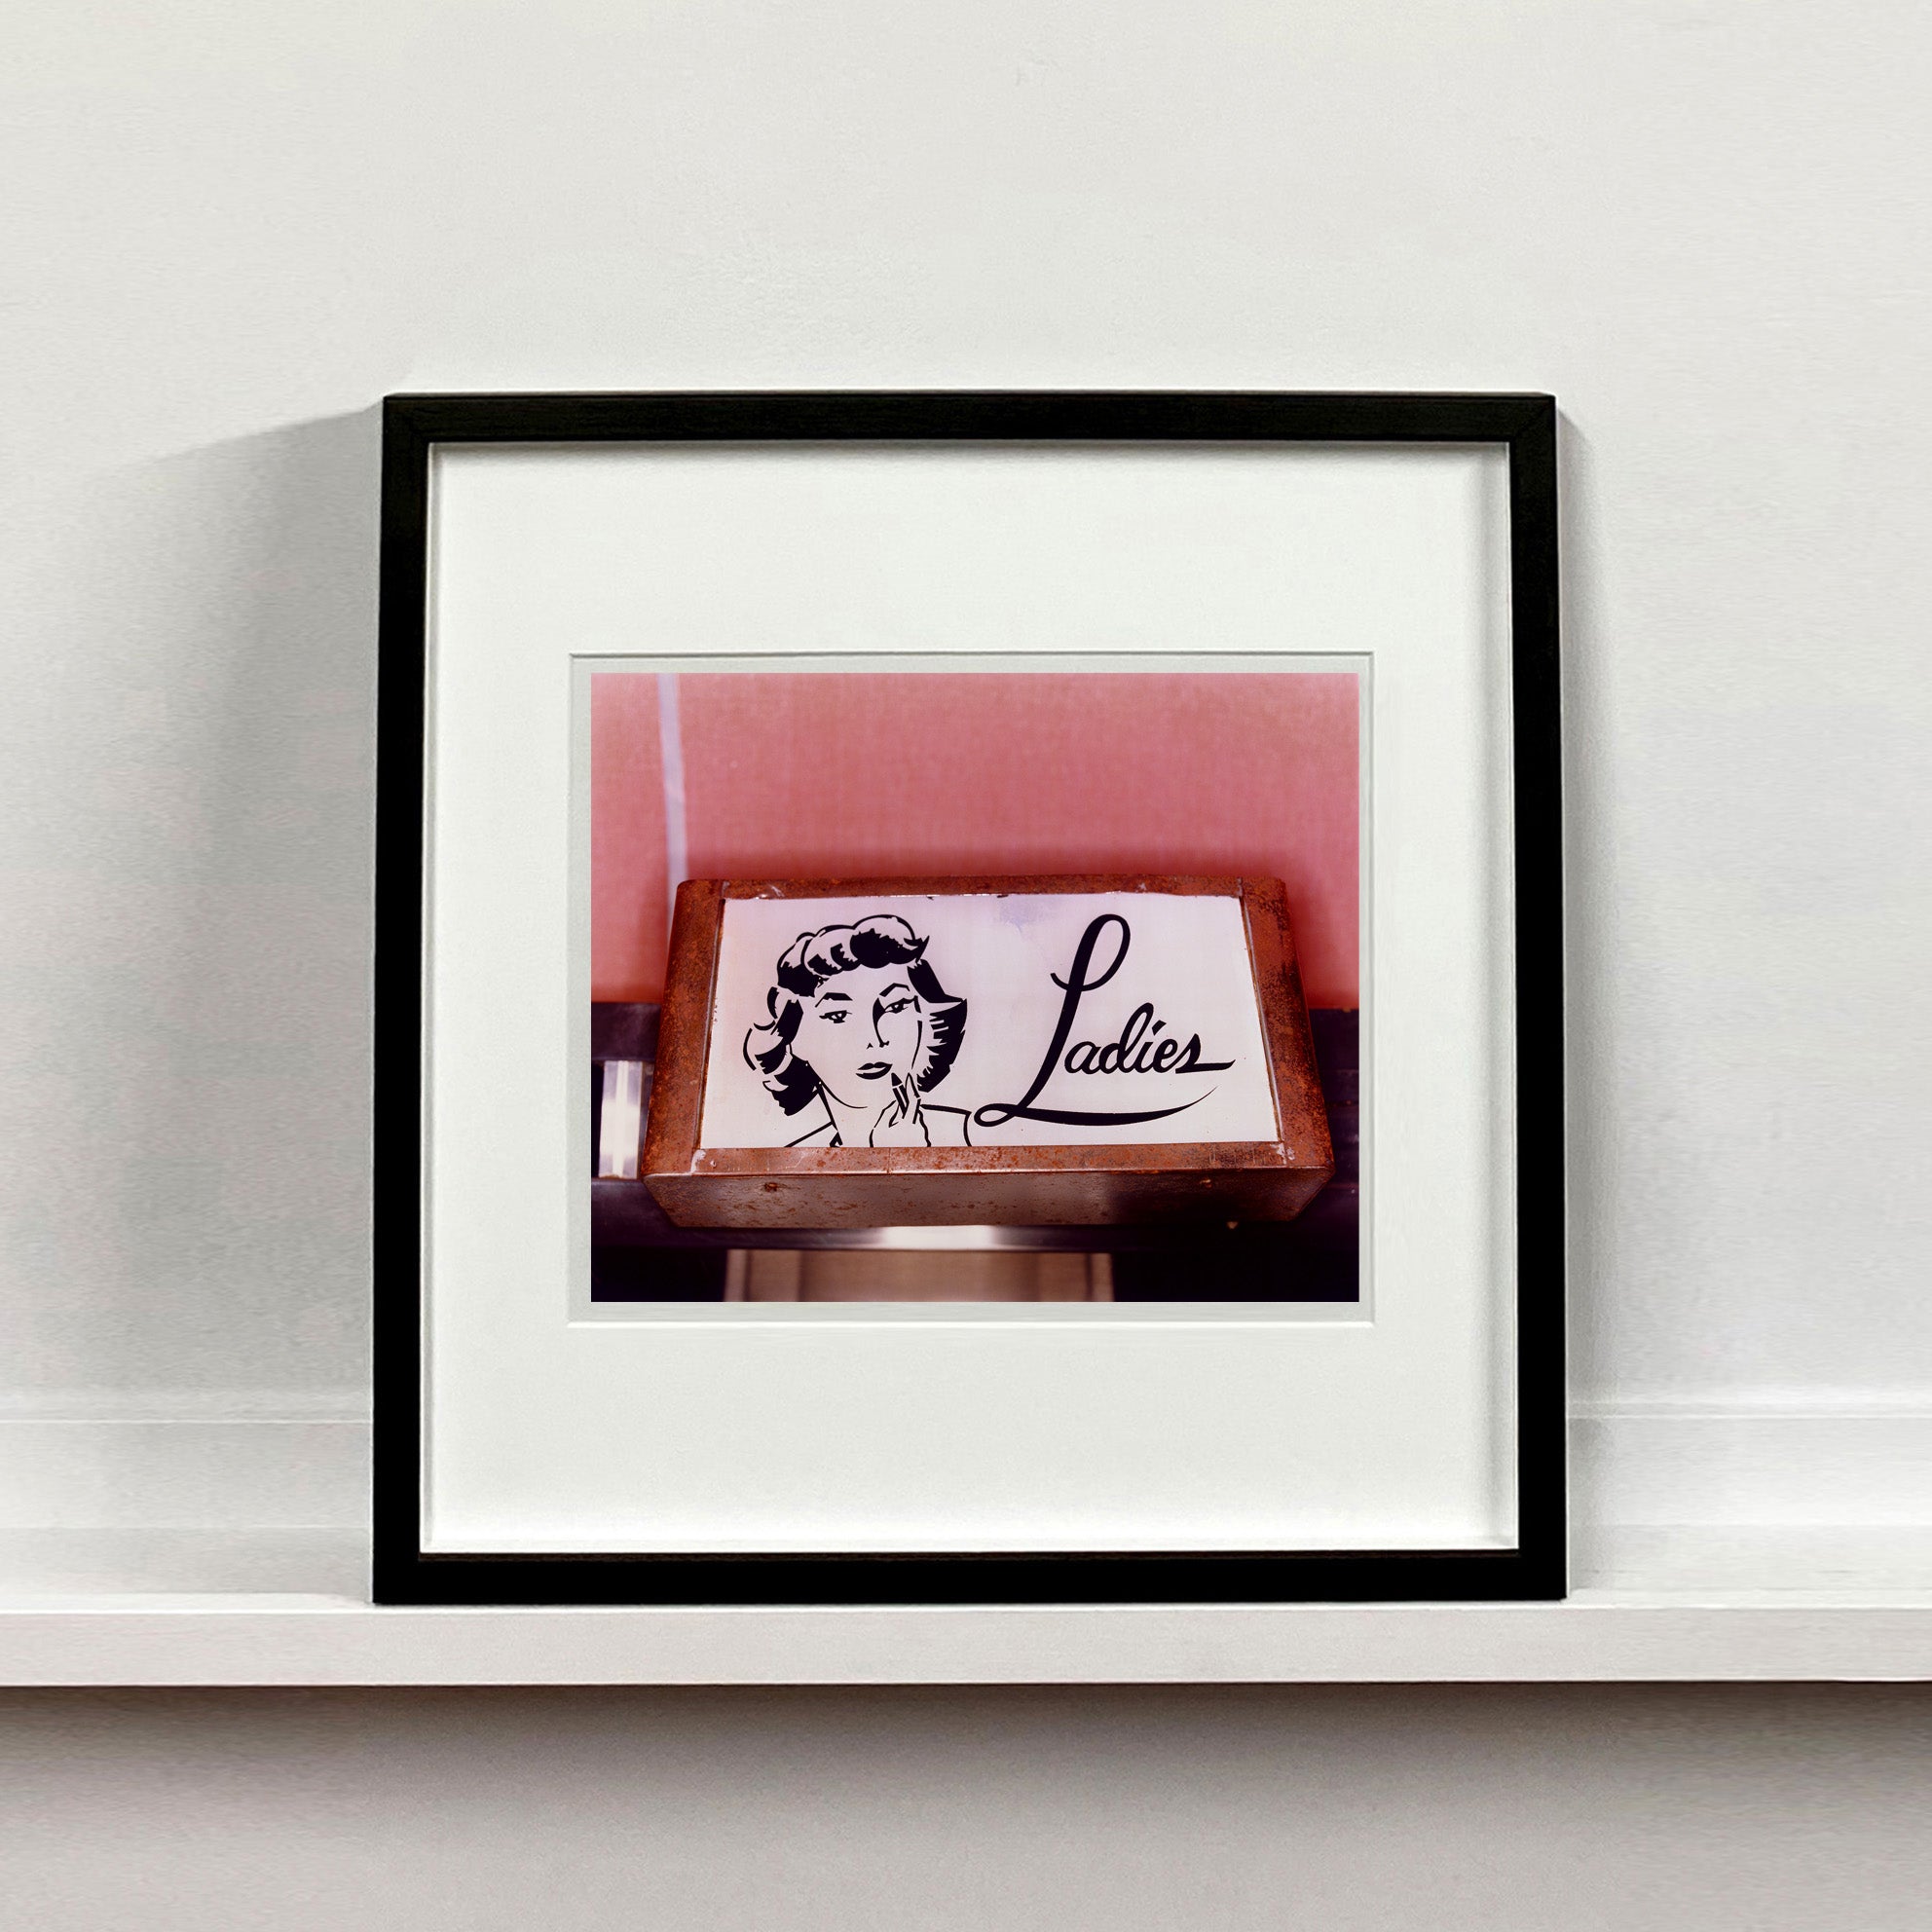 Black framed photograph by Richard Heeps. A kitsch Ladies' toilet sign. The sign has the word Ladies alongside an outline of 1950s woman. The sign sits in a wooden frame against a pink tiled wall.